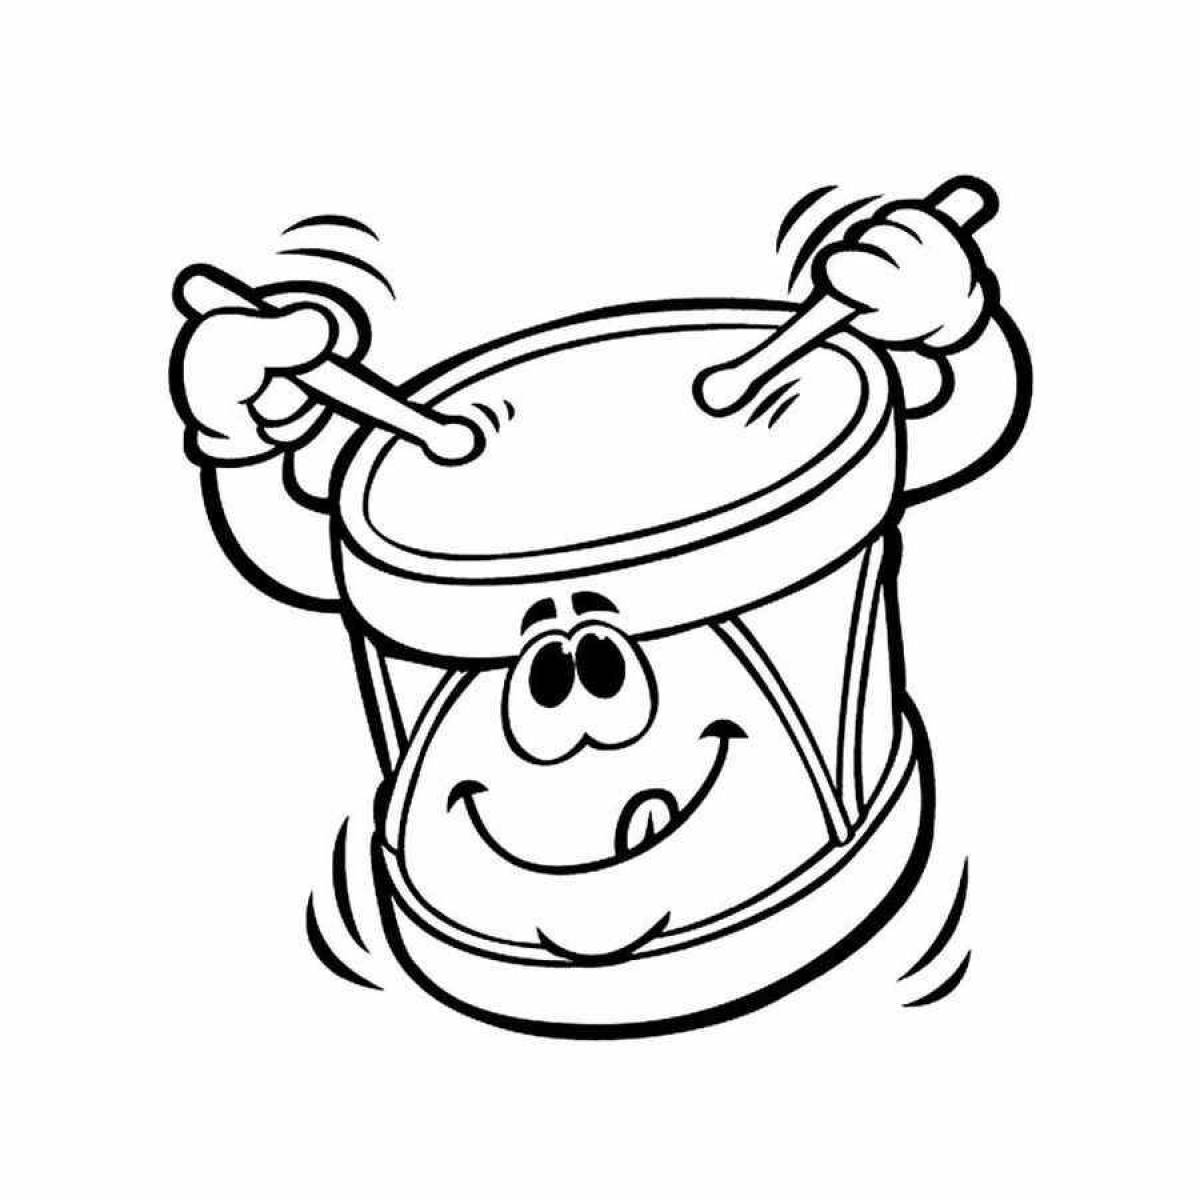 Coloring pages of drums for kids